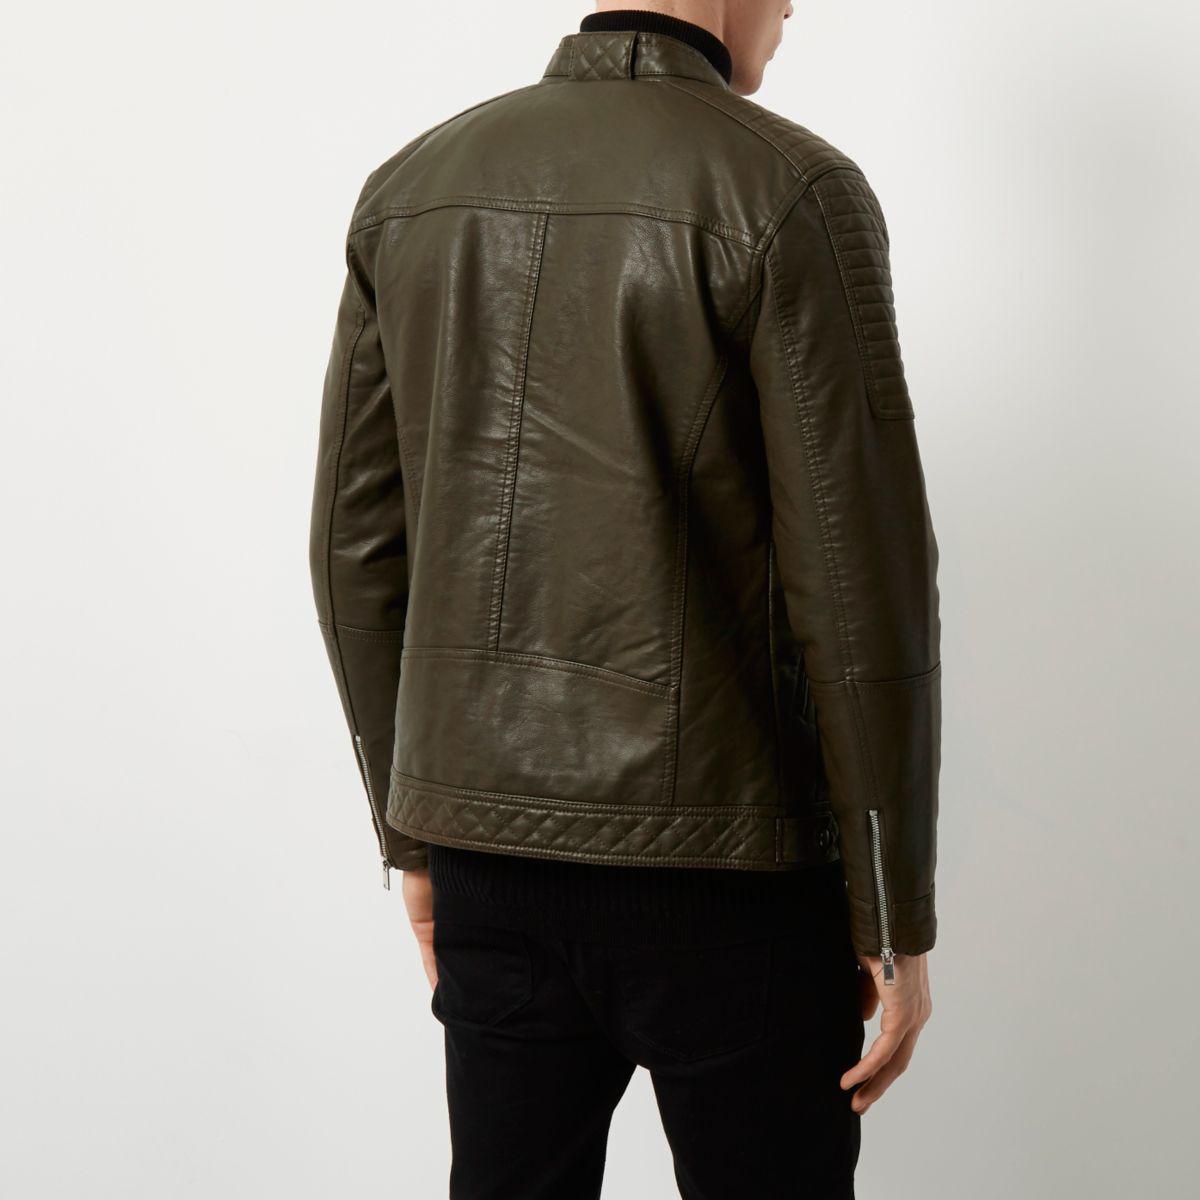 Lyst - River Island Racer Neck Faux-leather Jacket in Green for Men